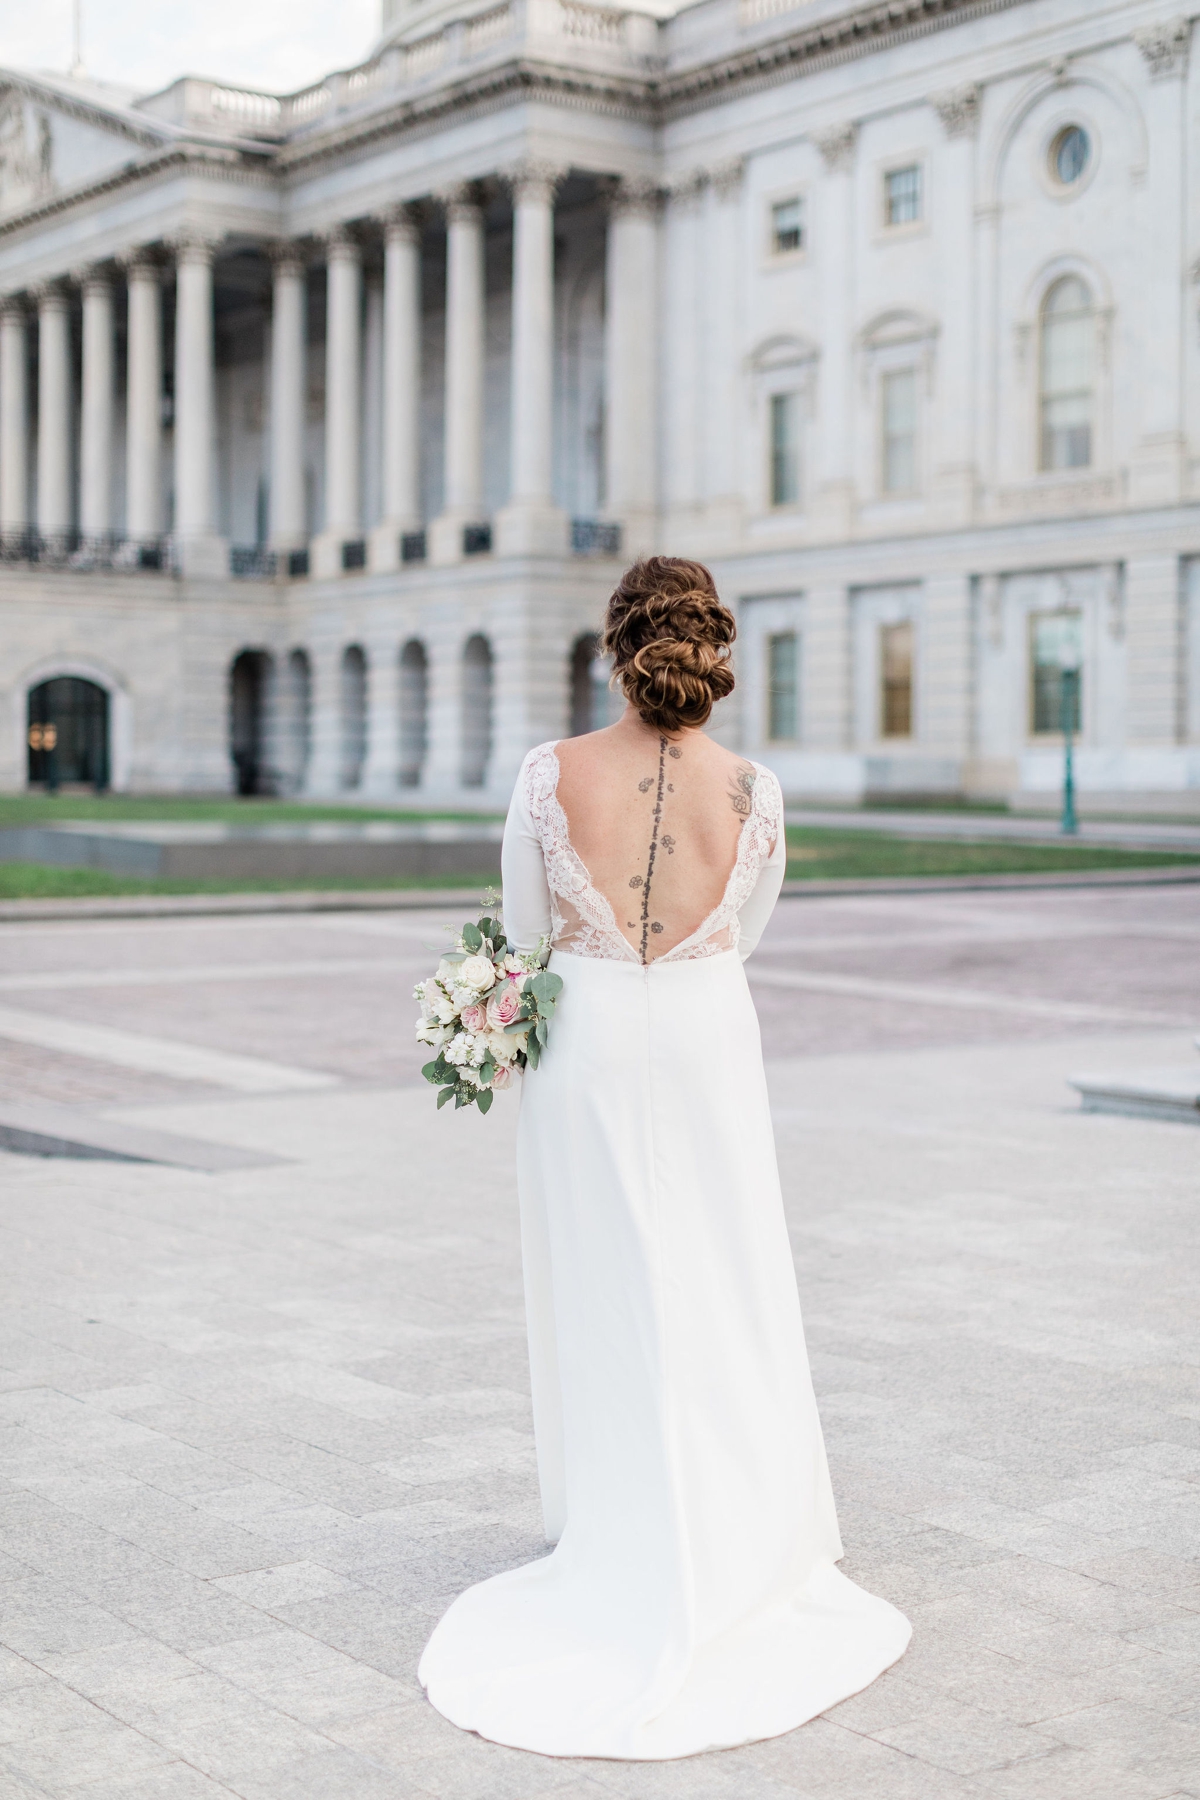 Bride in Amy Kushel from BHLDN